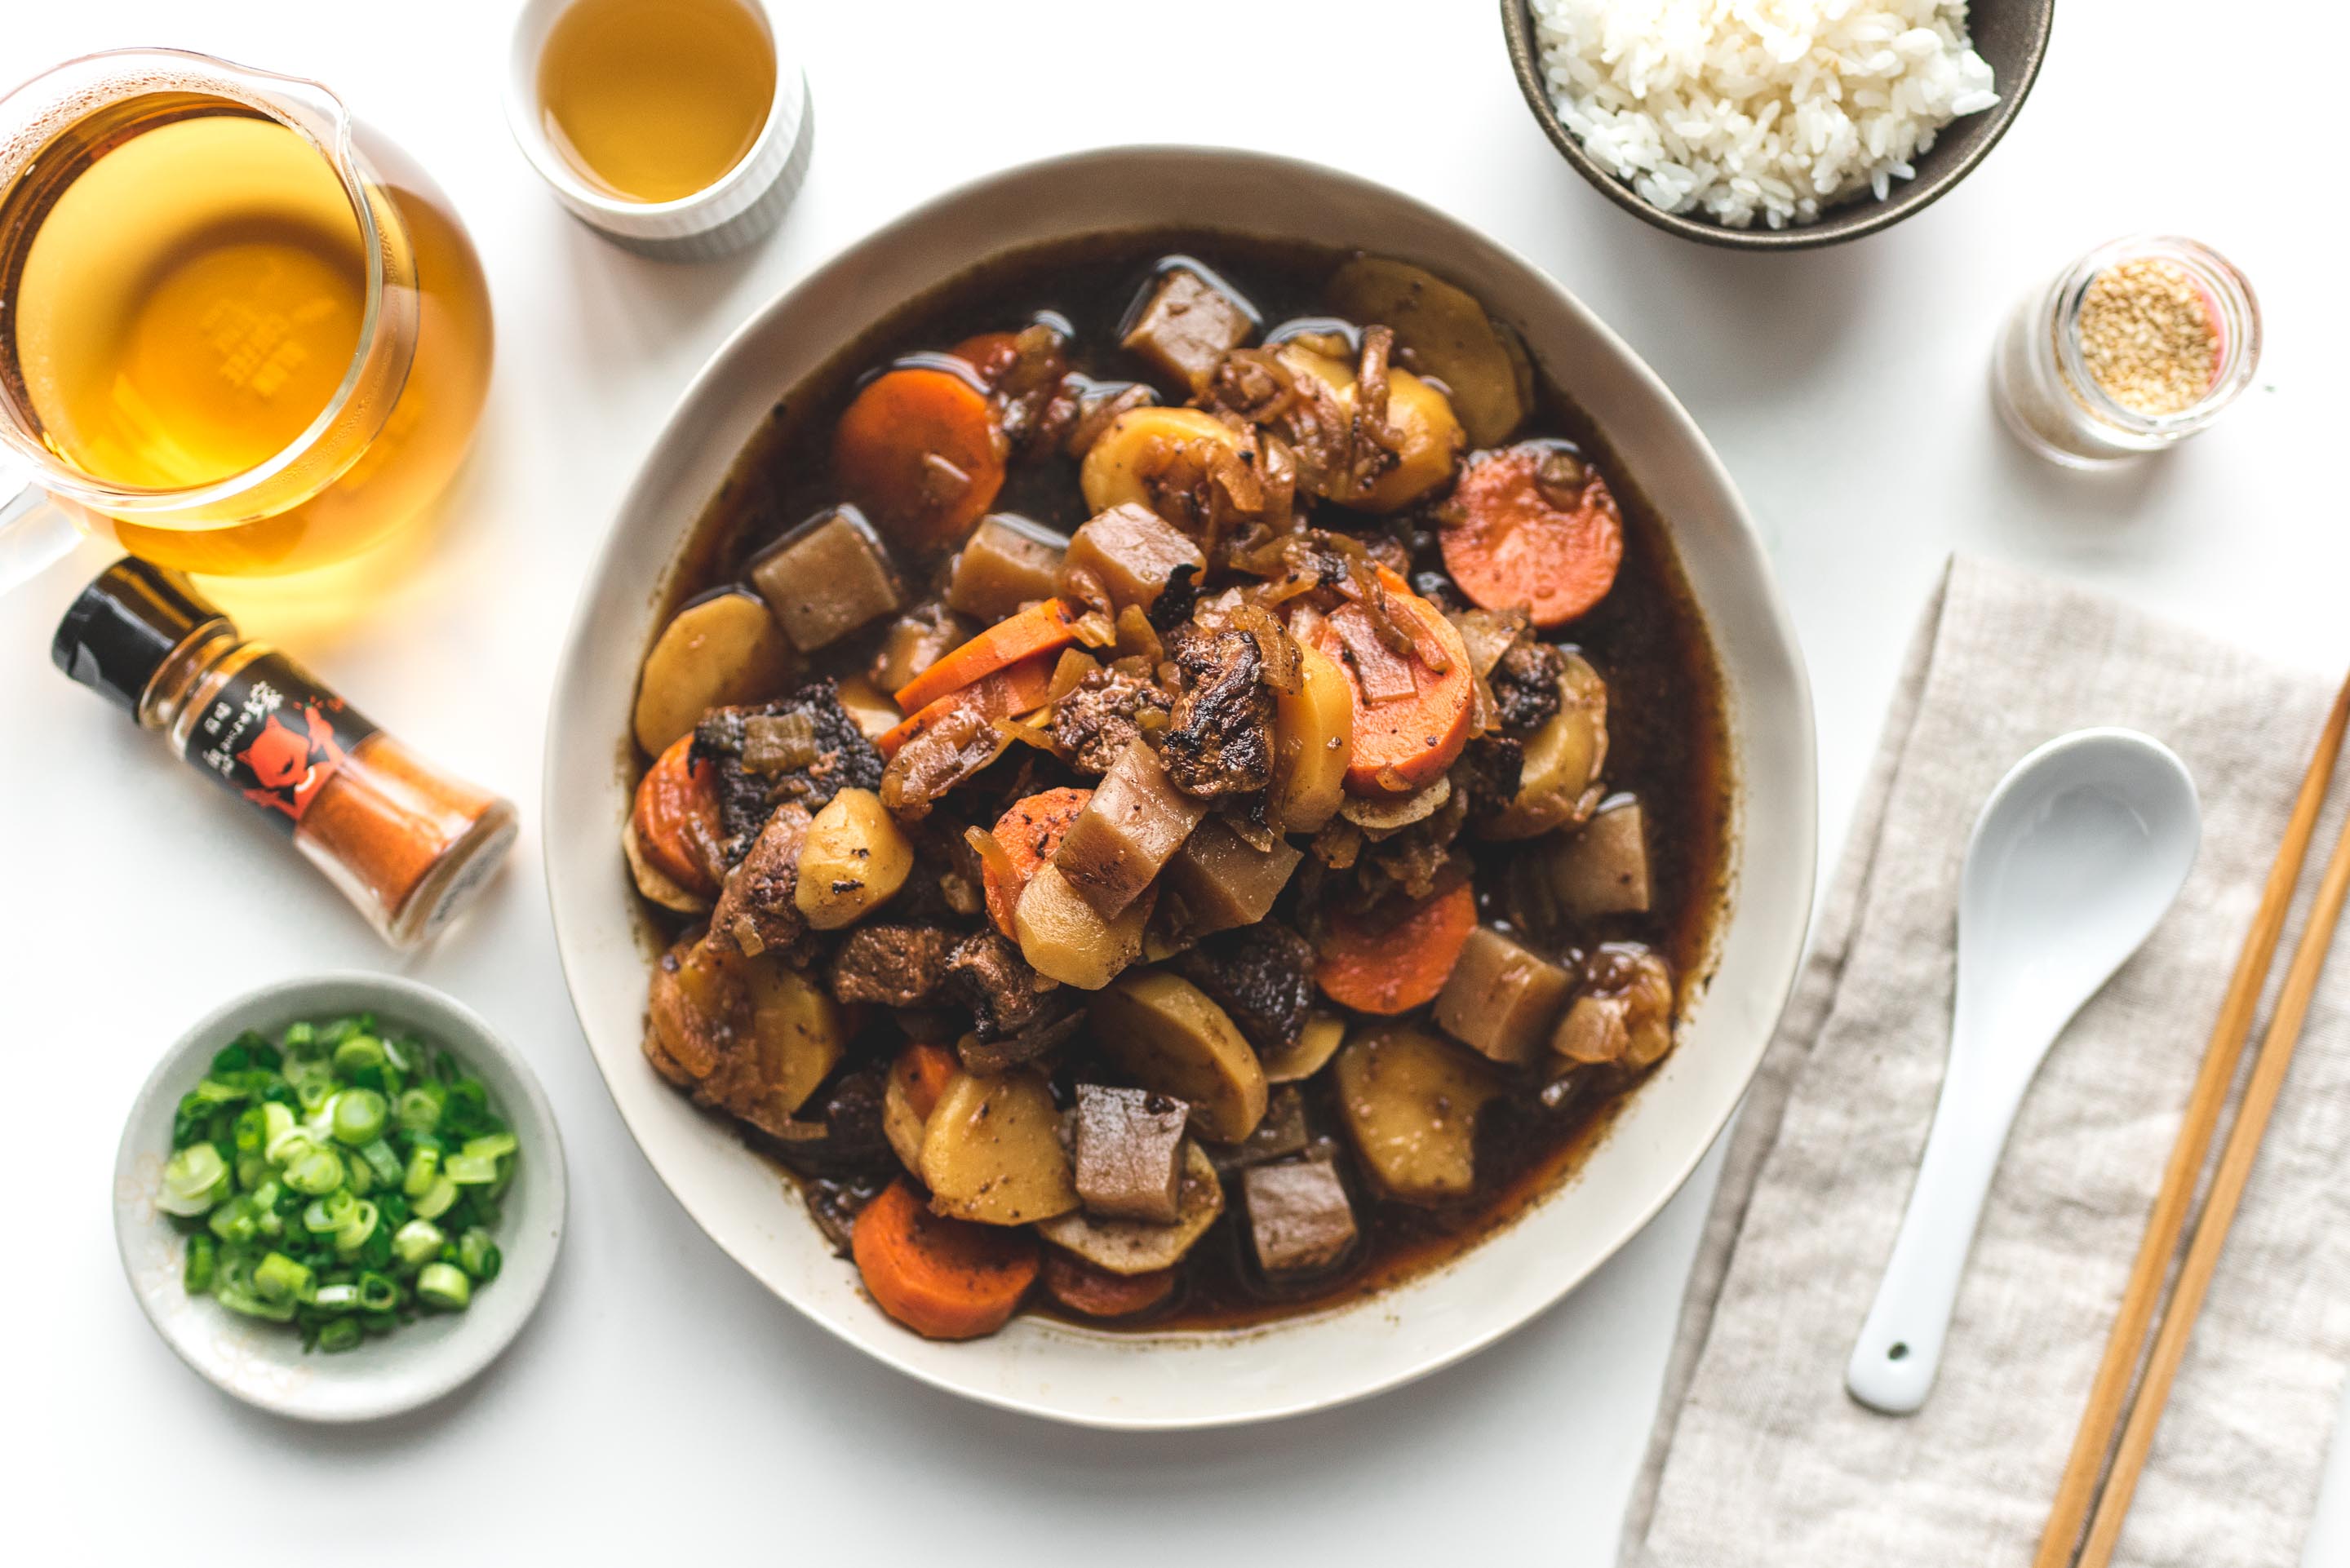 stew, this classic homemade beef stew goes perfectly with some artisan brea...